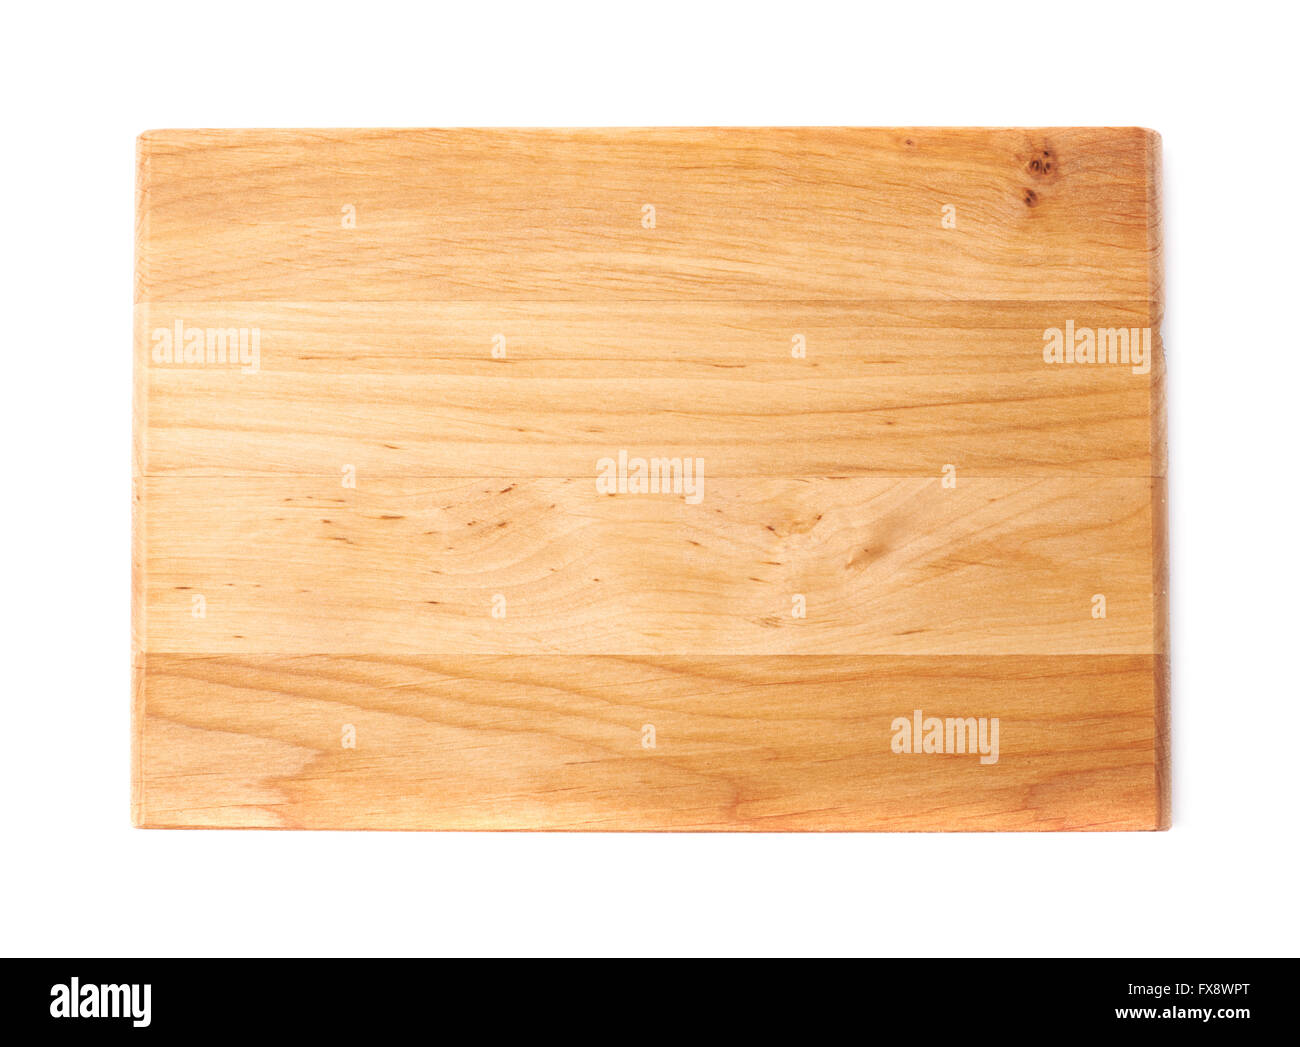 Unused wooden cutting board isolated Stock Photo